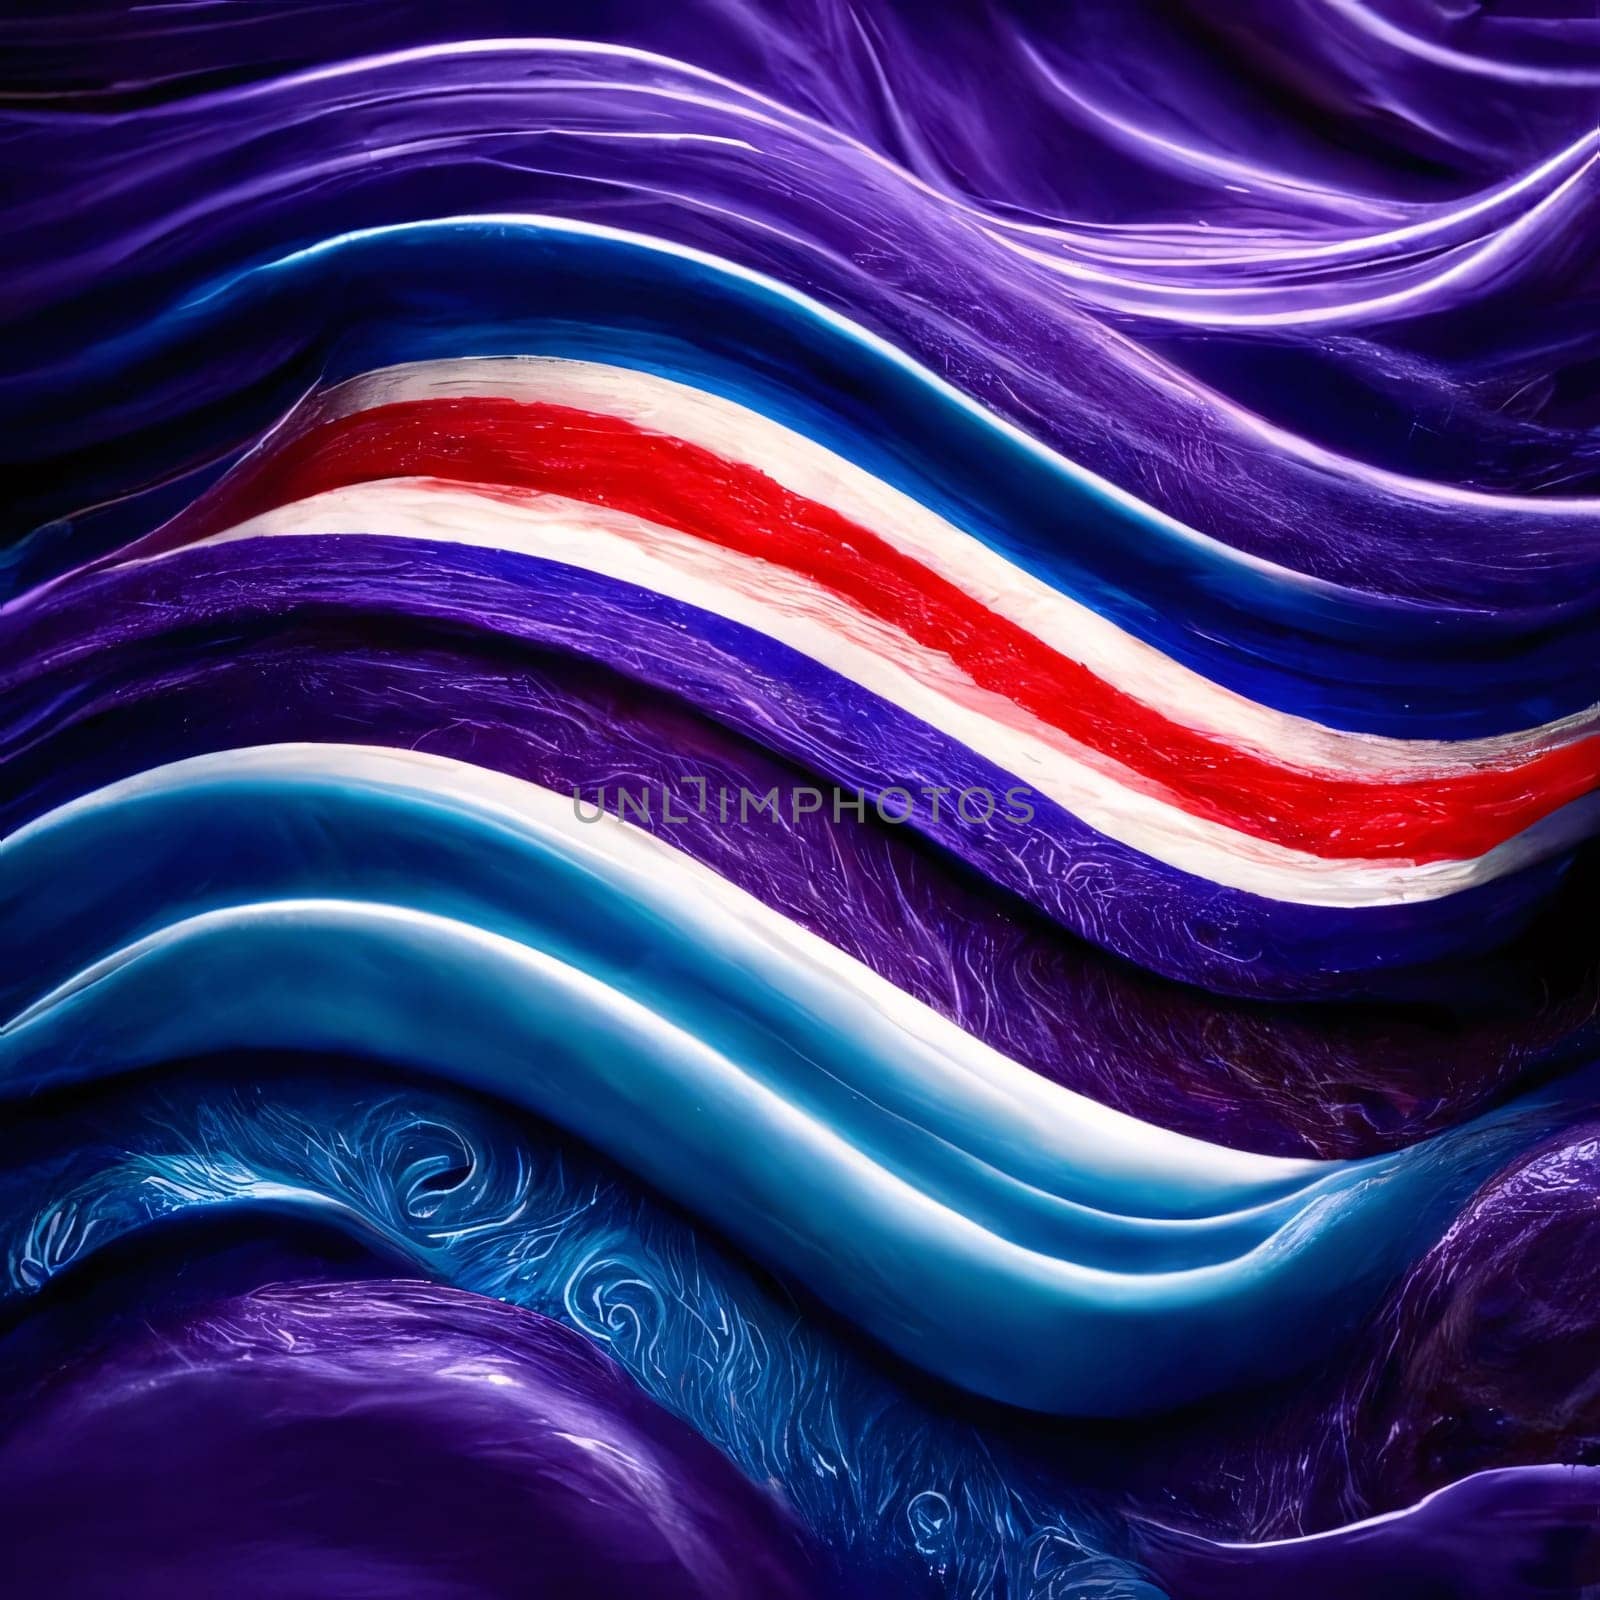 Abstract background design: 3d rendering of the flag of the United States of America in blue and purple